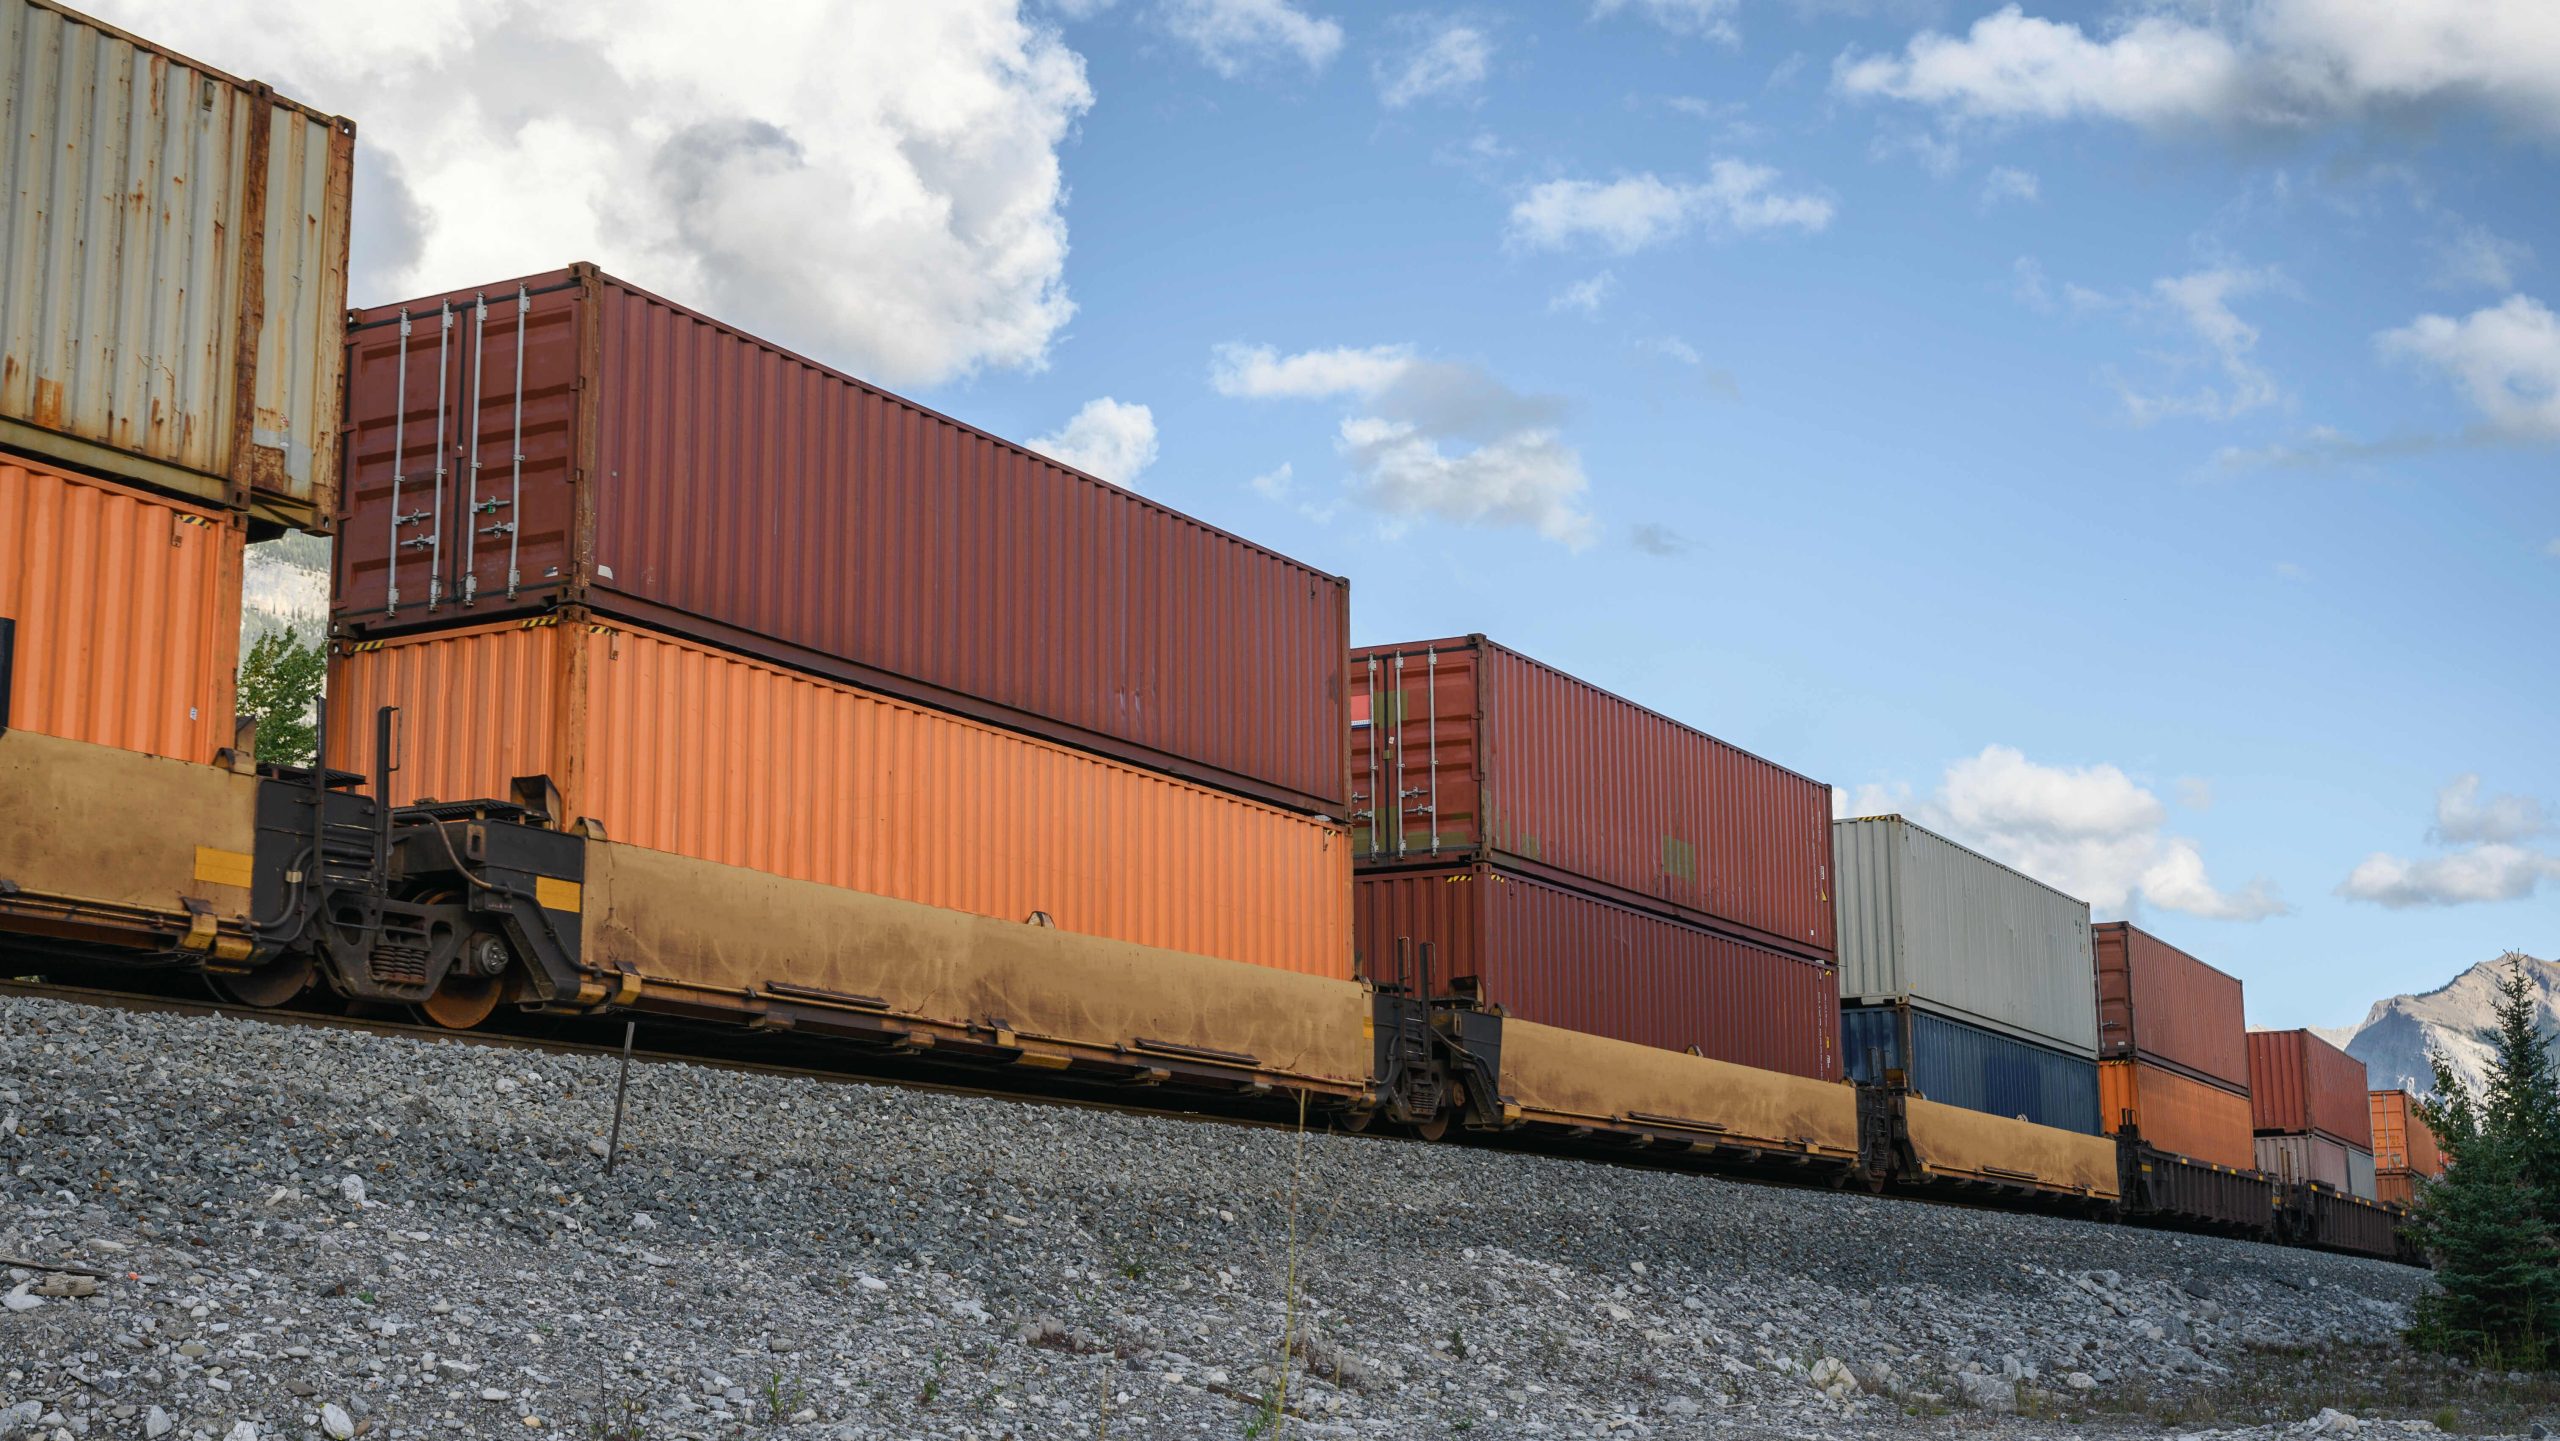 Intermodal shipping containers stacked on a train, showcasing seamless, efficient freight transport through rail with a clear sky in the background.